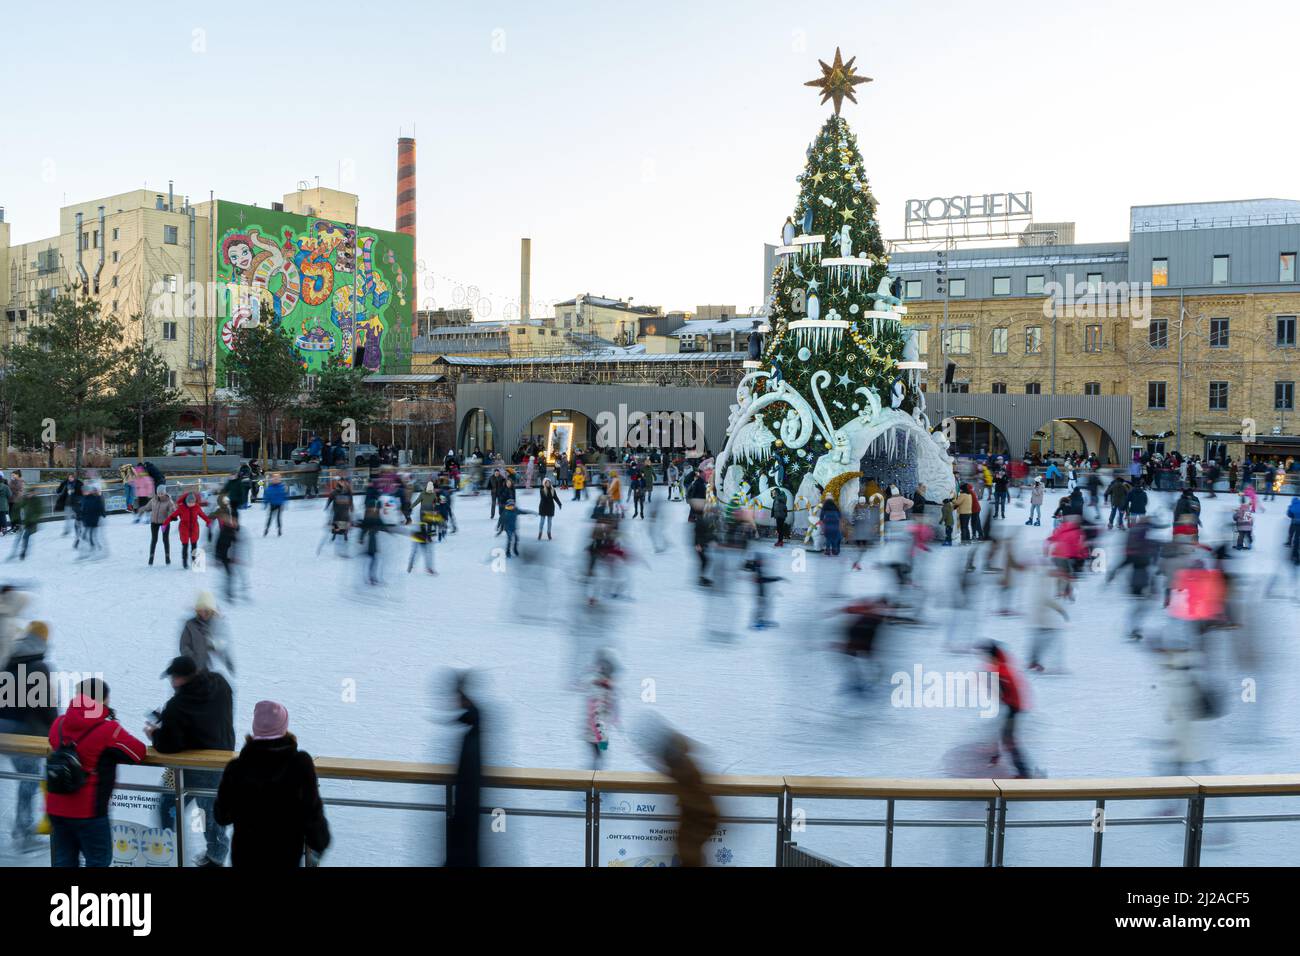 Ukraine, Kyiv - January 7, 2022: Ice skating rink in winter. People are skating. Skates ride on ice. Ice skating is a winter sport entertainment. Christmas time. Christmas tree Roshen factory. Crowd Stock Photo